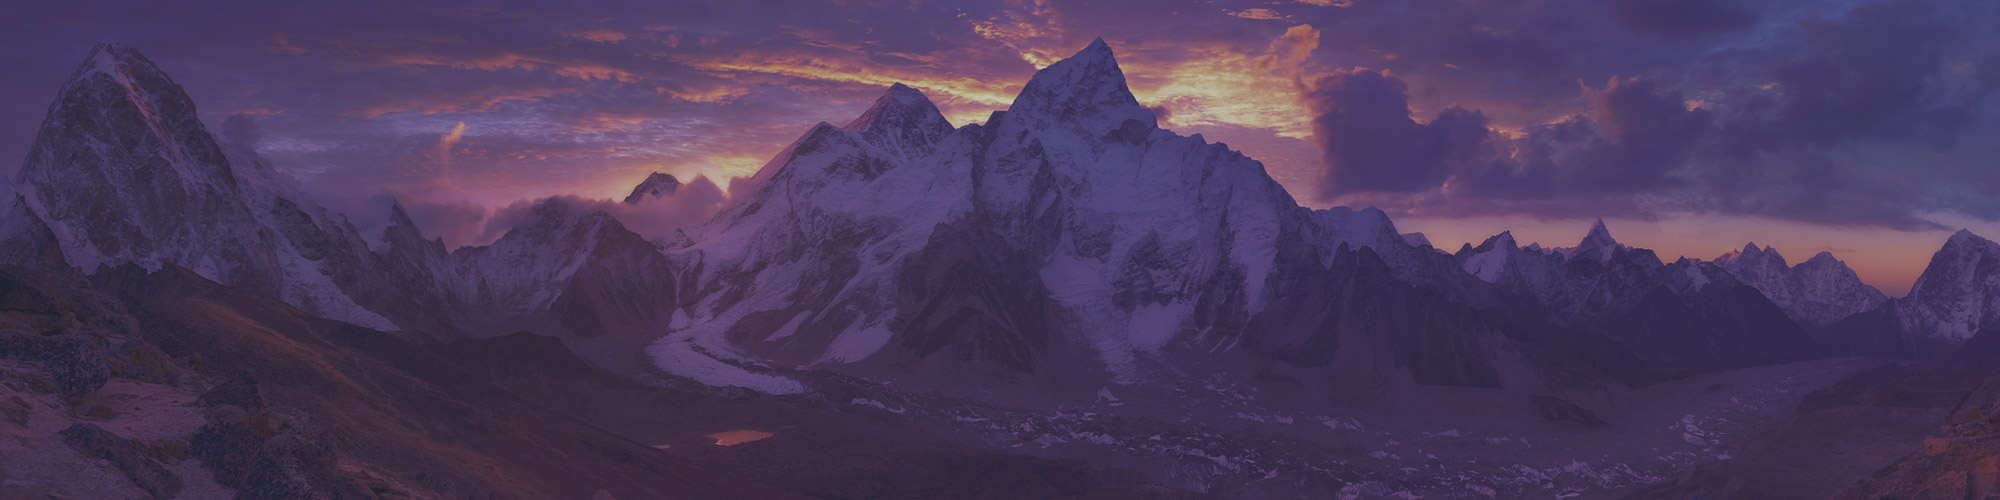 How to Position Retirement Planning to Your Clients: The Mount Everest Descent